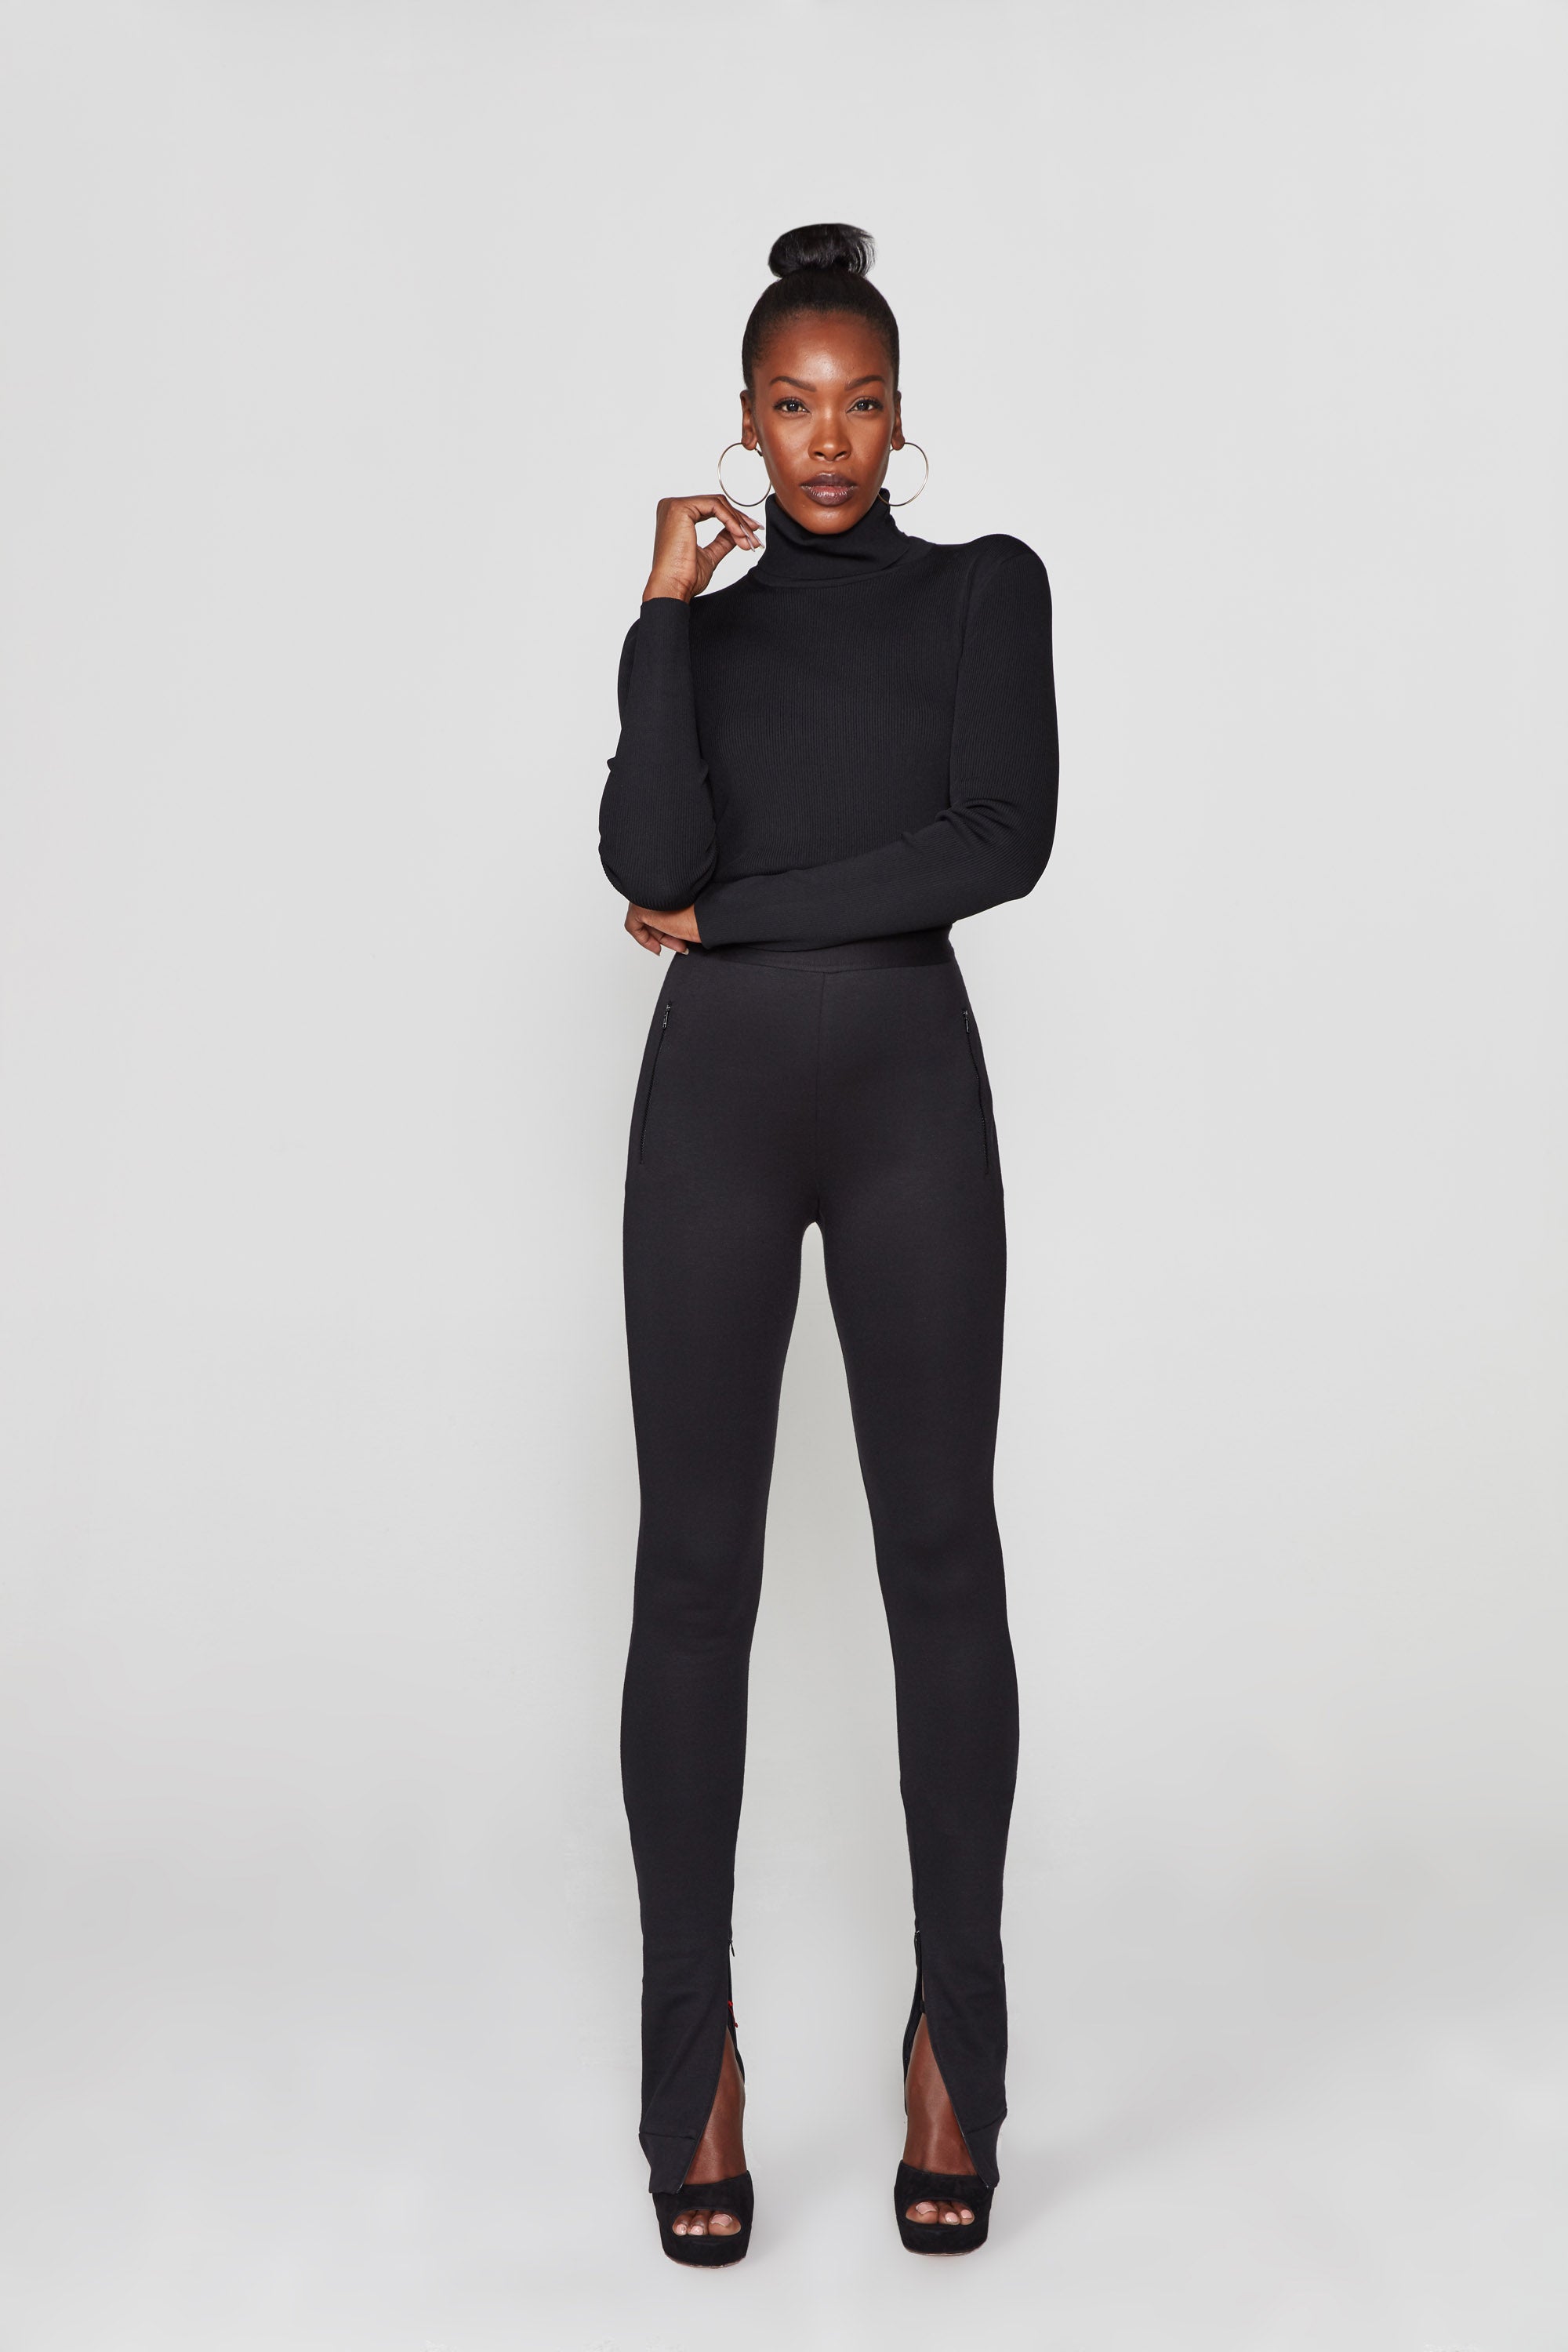 Chanel Pant - Shop Business Casual Leggings - THE SIXES